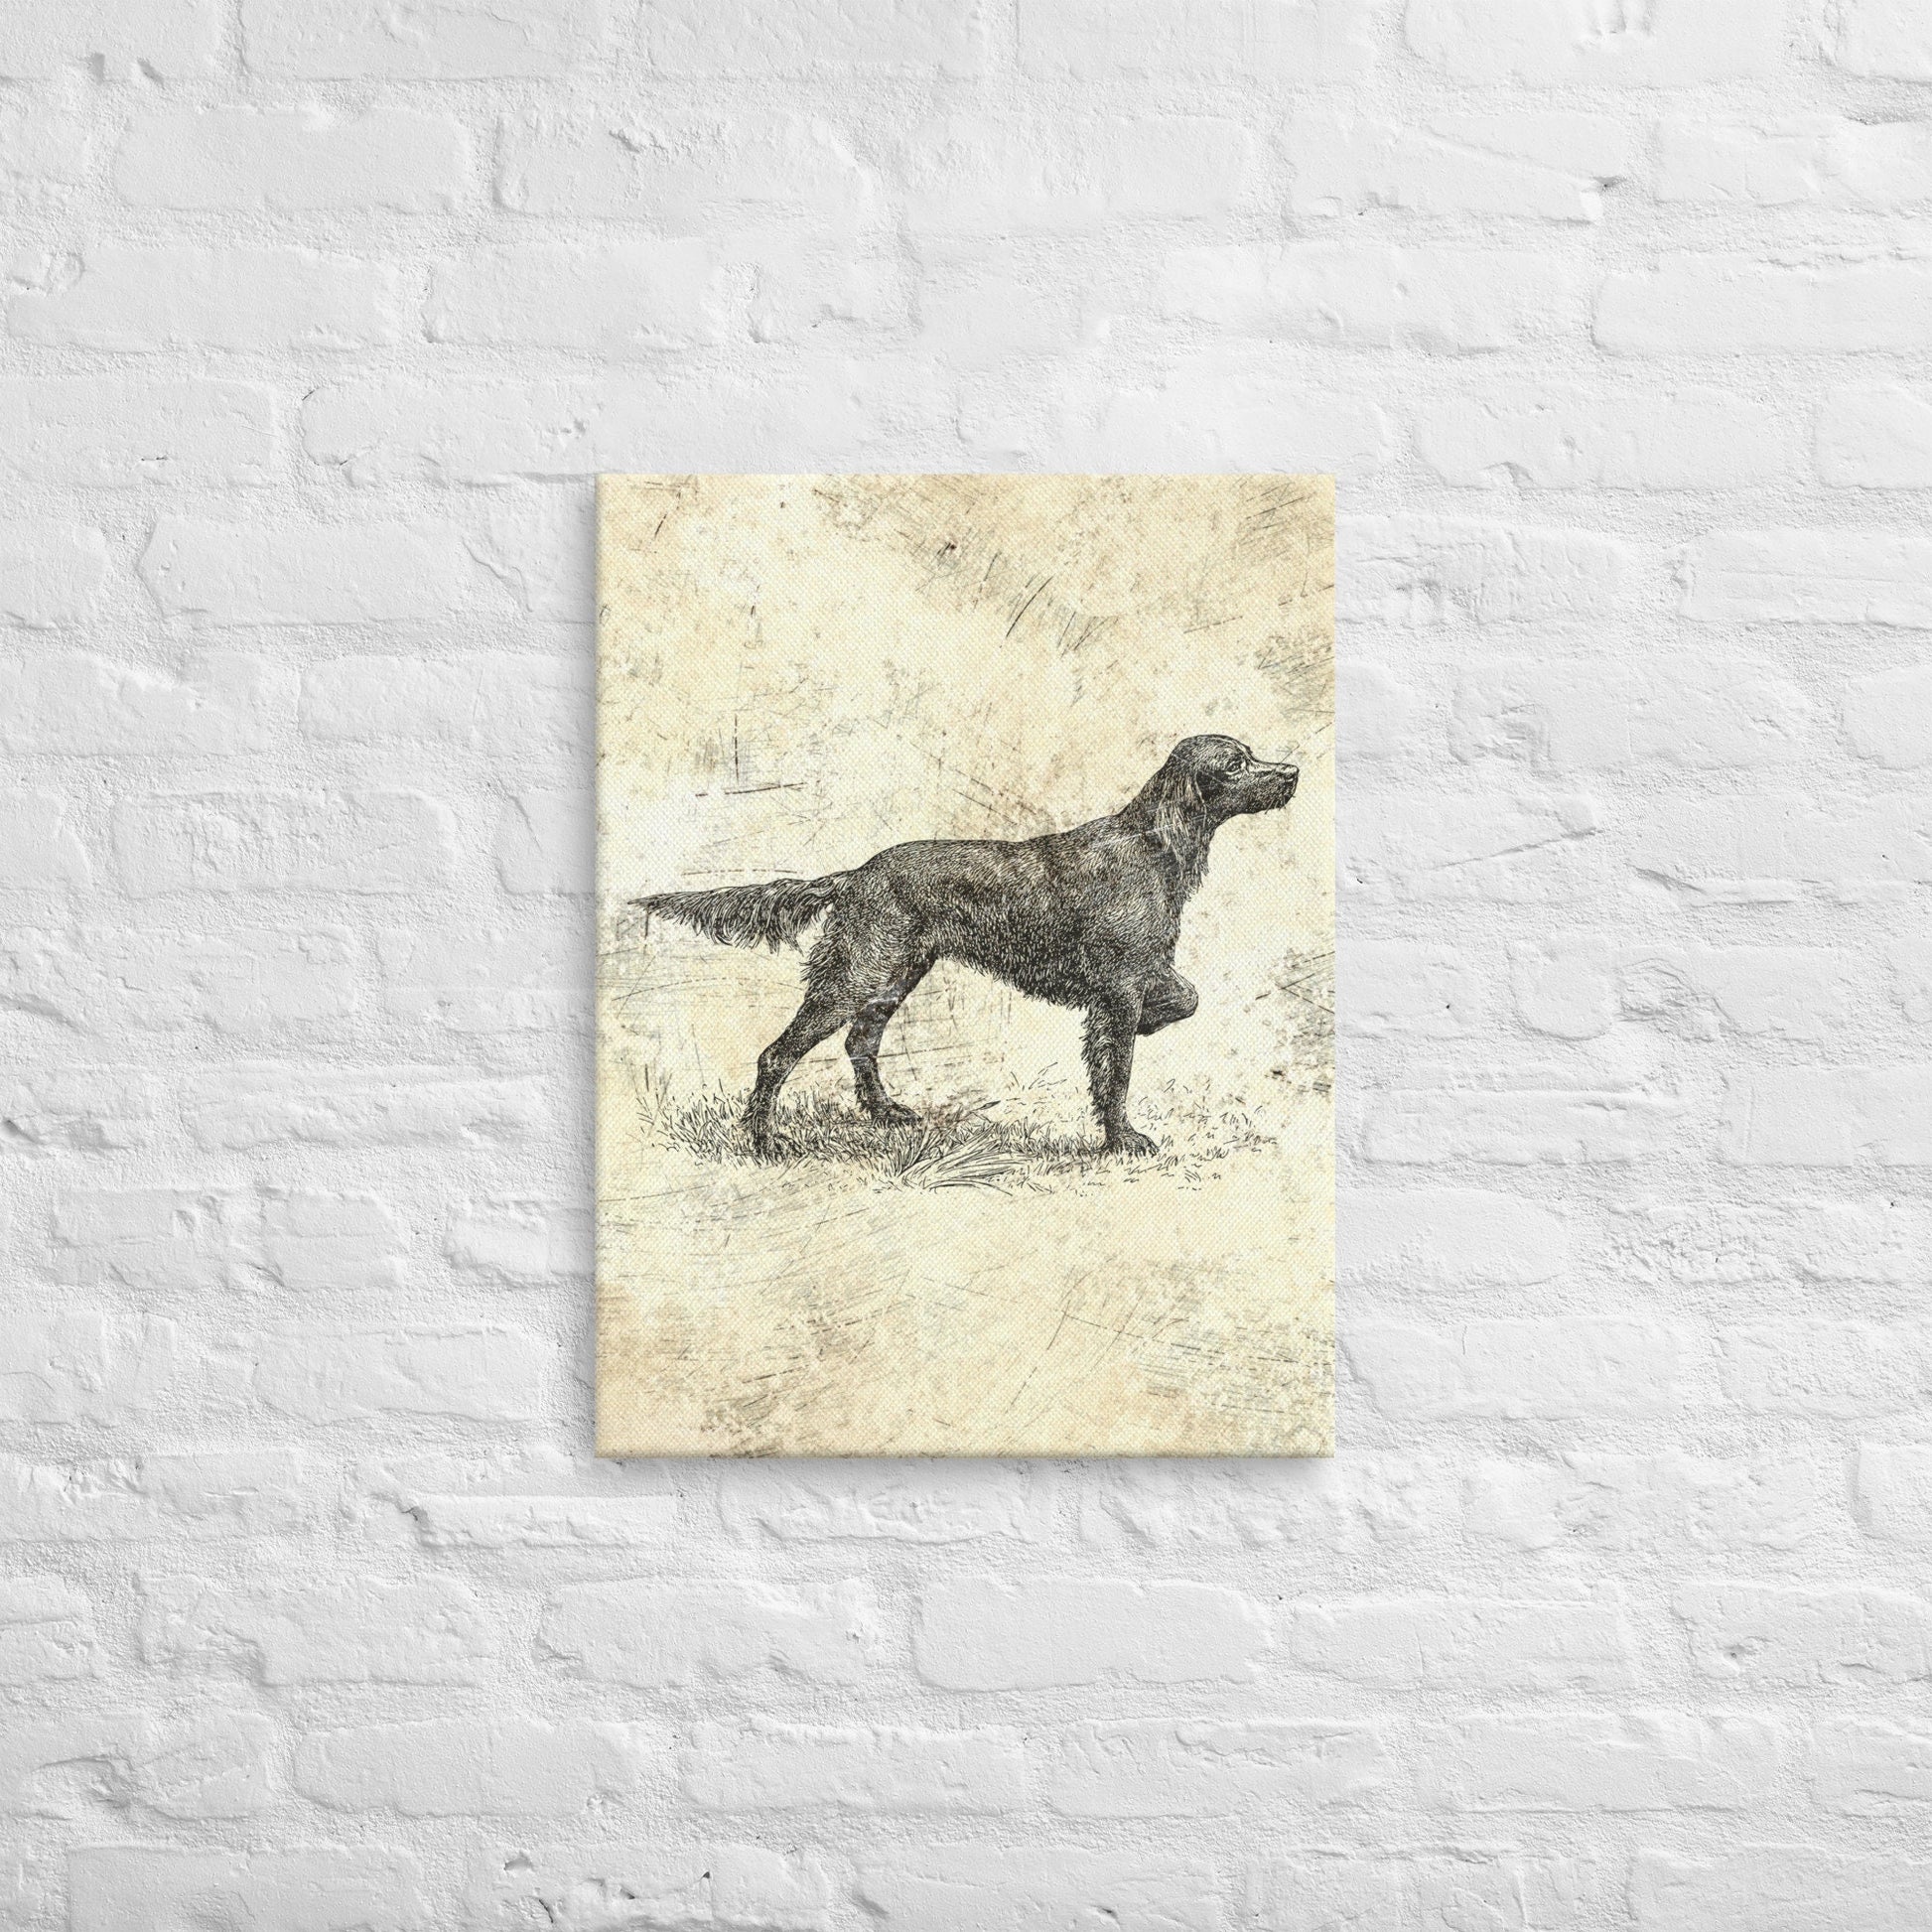 Irish Setter Vintage Retro Distressed Hunting Dog Stretched Canvas Hunter Wall Decor for the Hunting Cabins or Lodges